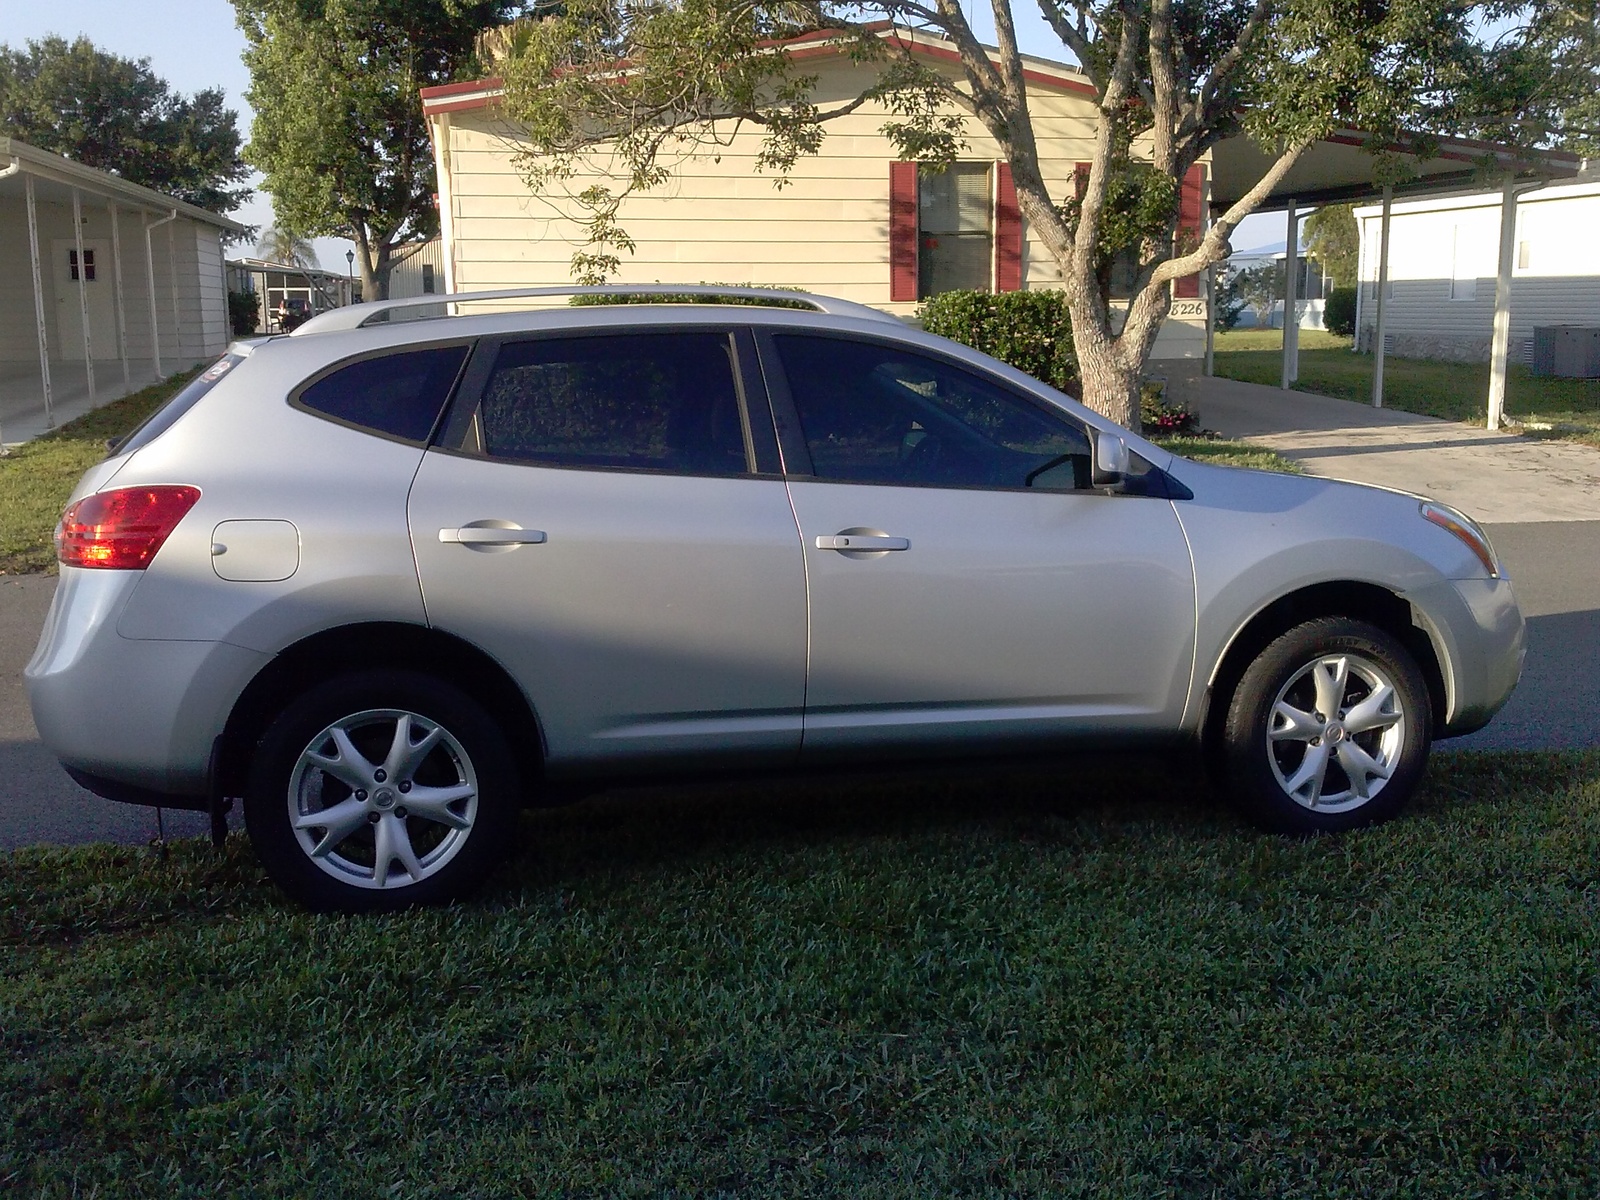 Rate nissan rogue 2008